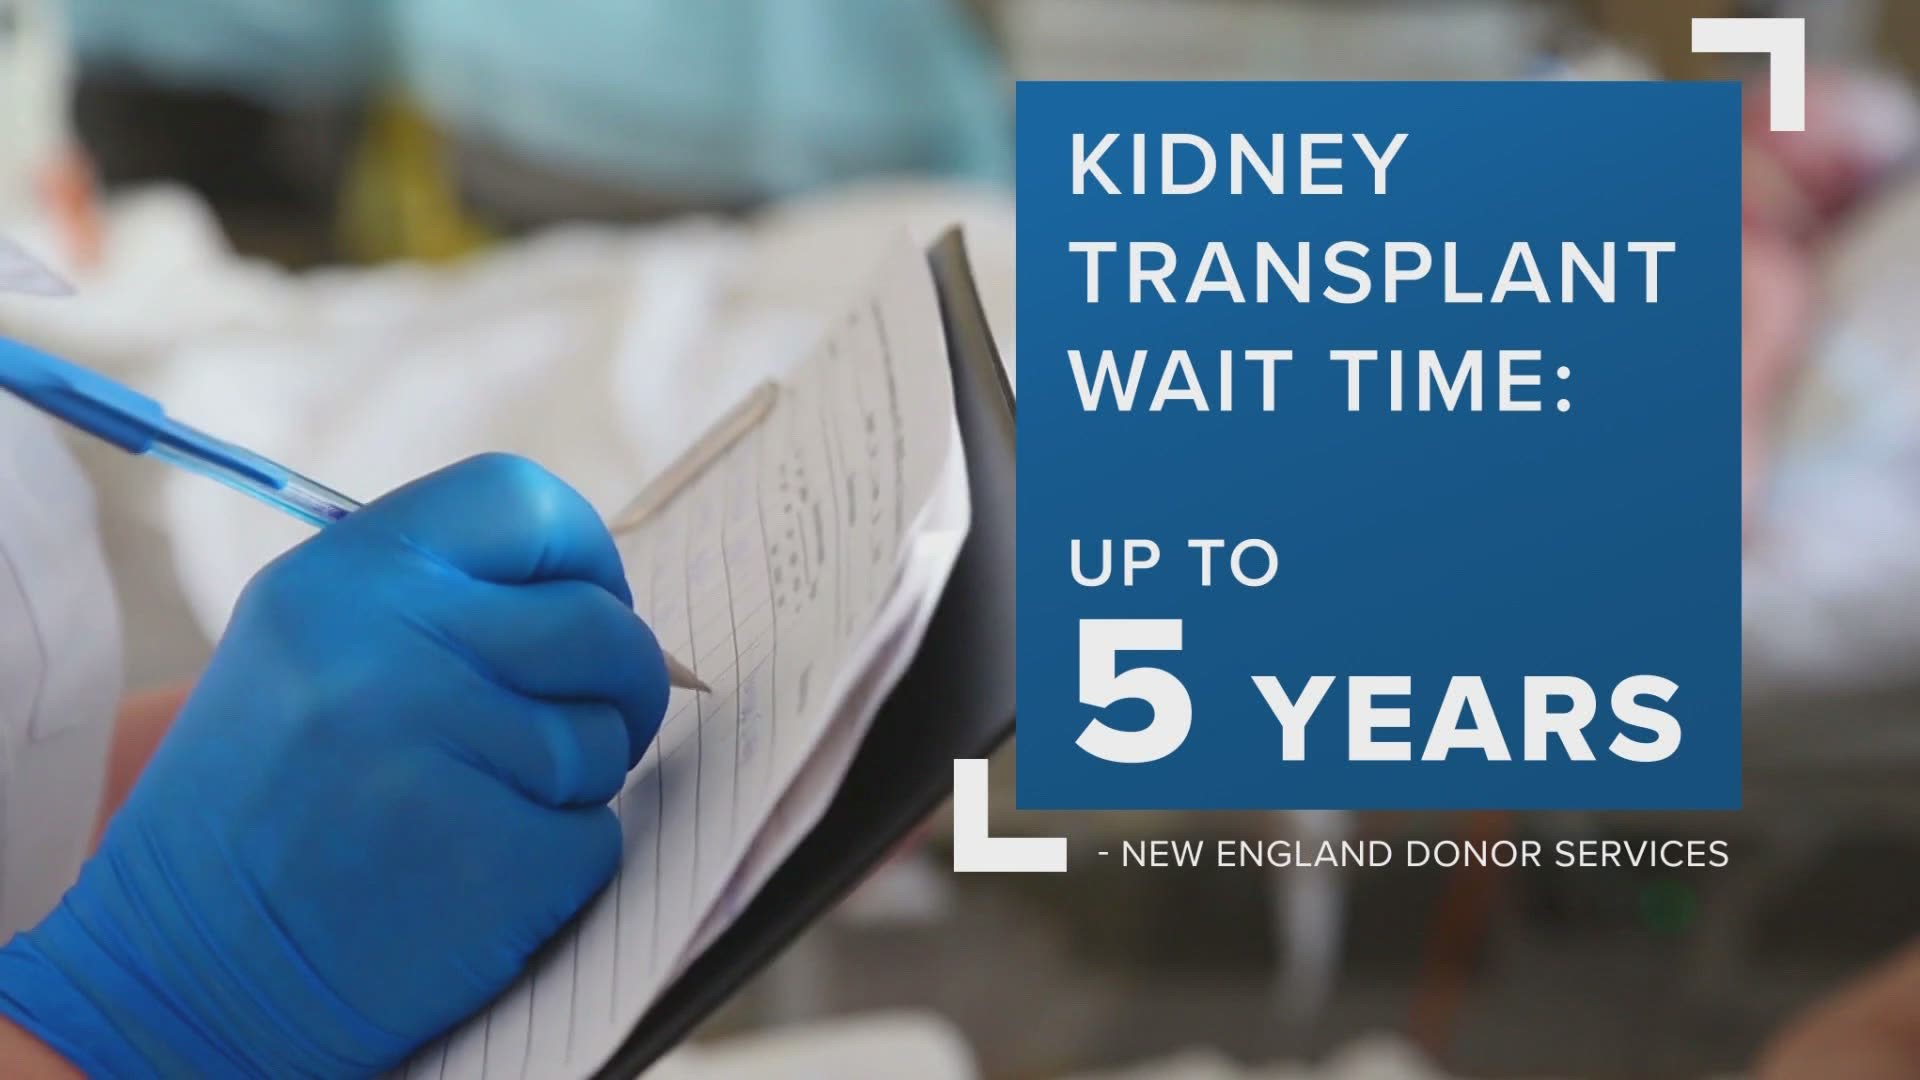 Co-workers share life-saving kidney transplant